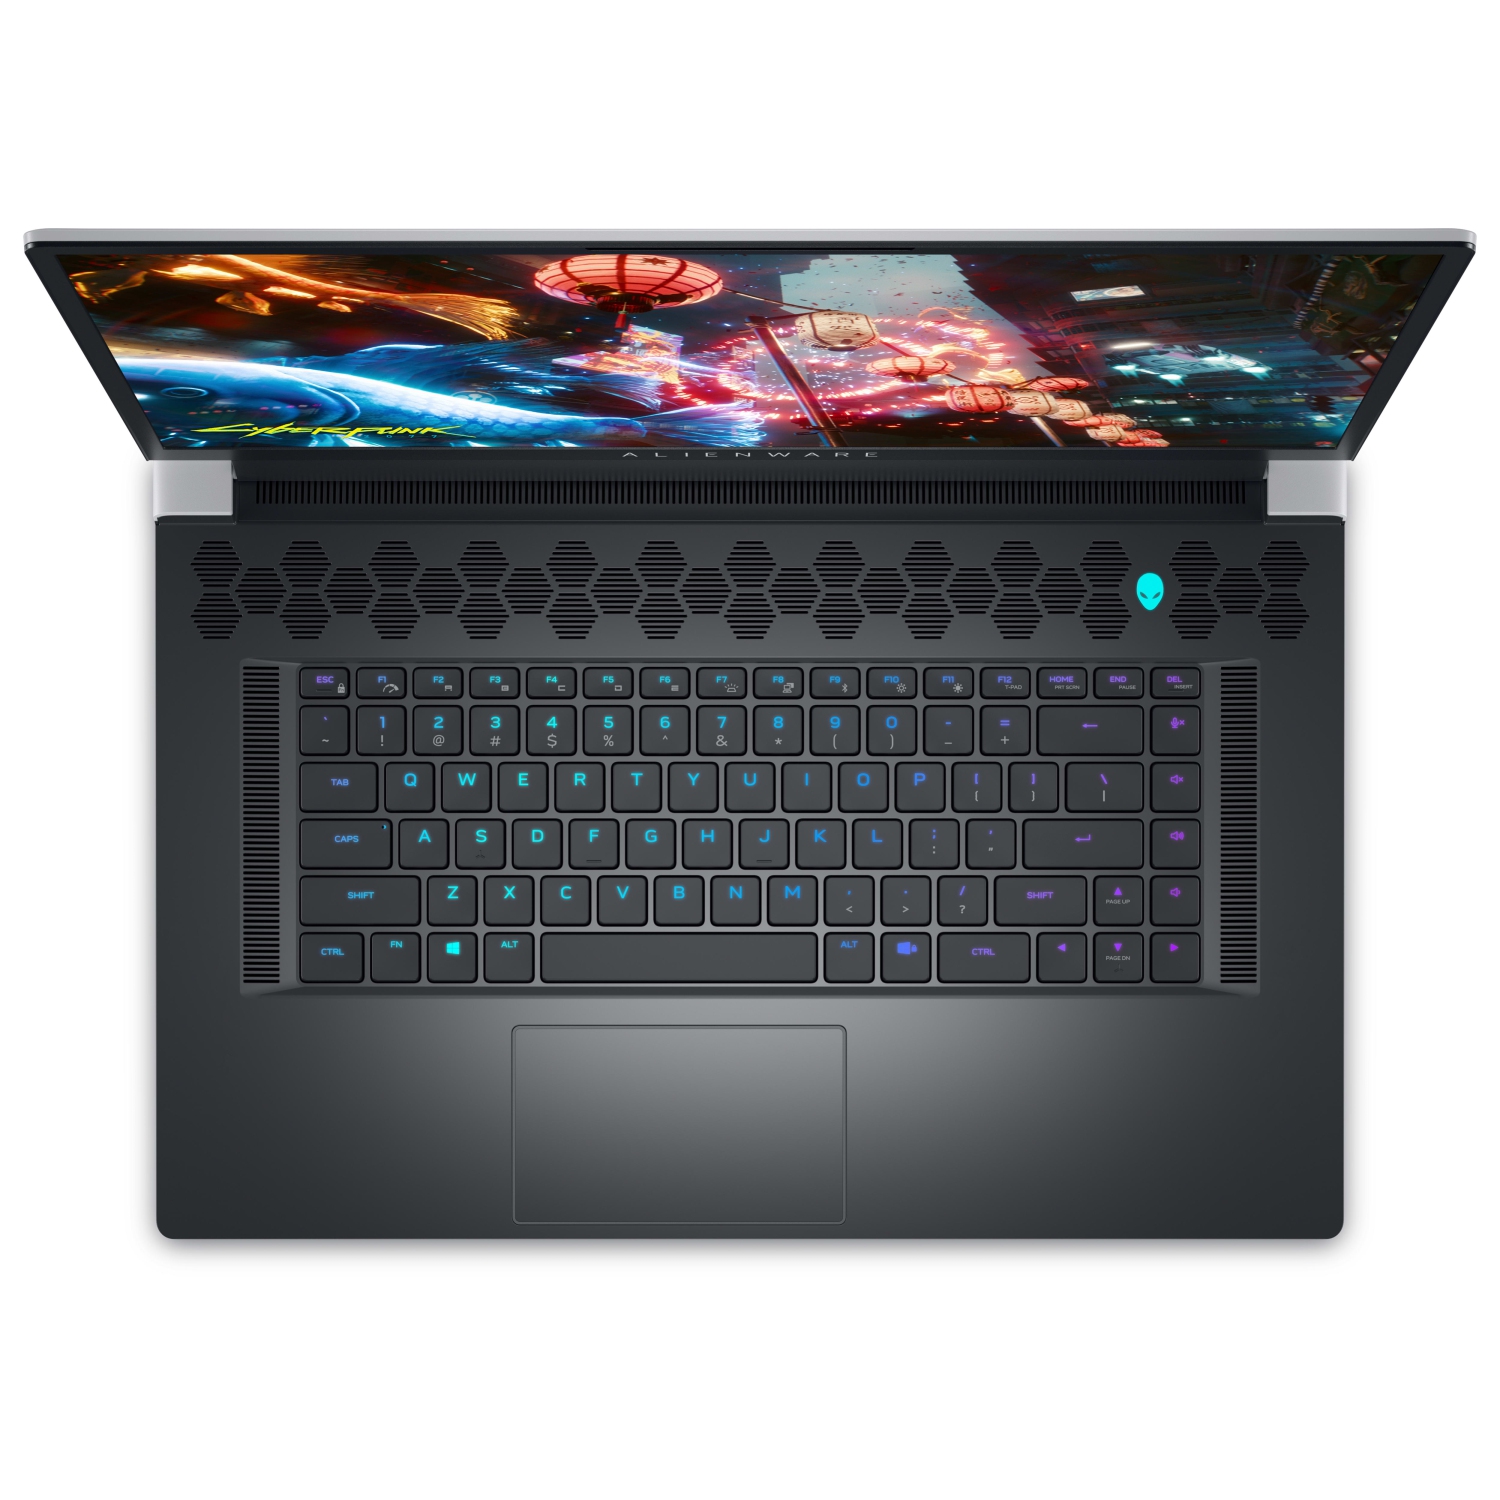 Refurbished (Excellent) – Dell Alienware X17 R2 Gaming Laptop (2022) | 17.3" FHD | Core i9 - 1TB SSD - 16GB RAM - 3080 Ti | 14 Cores @ 5 GHz - 12th Gen CPU - 12GB GDDR6X